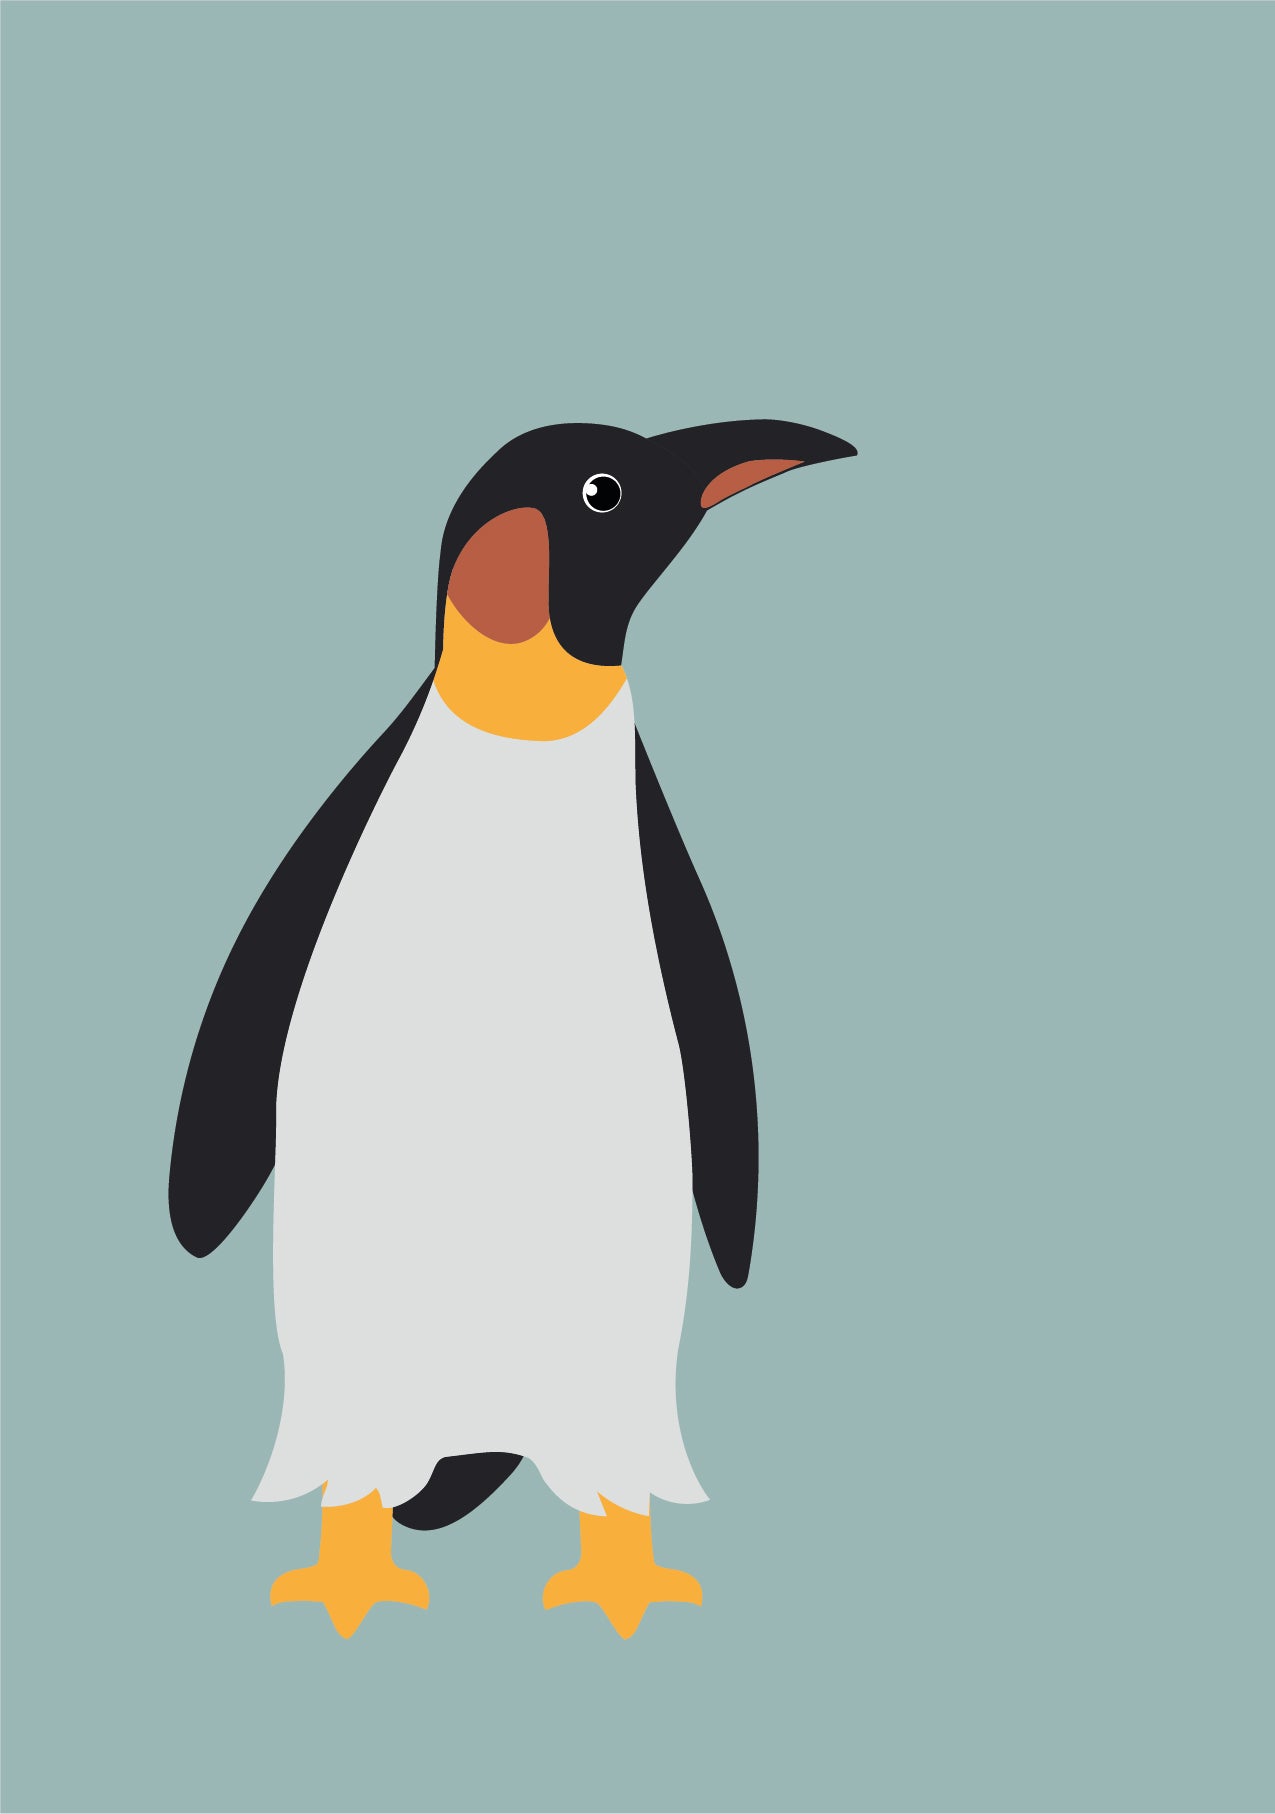 Greeting card with a drawing of a penguin on a light blue-green background and features tags such as penguin, animal, drawing, illustration and cute. 